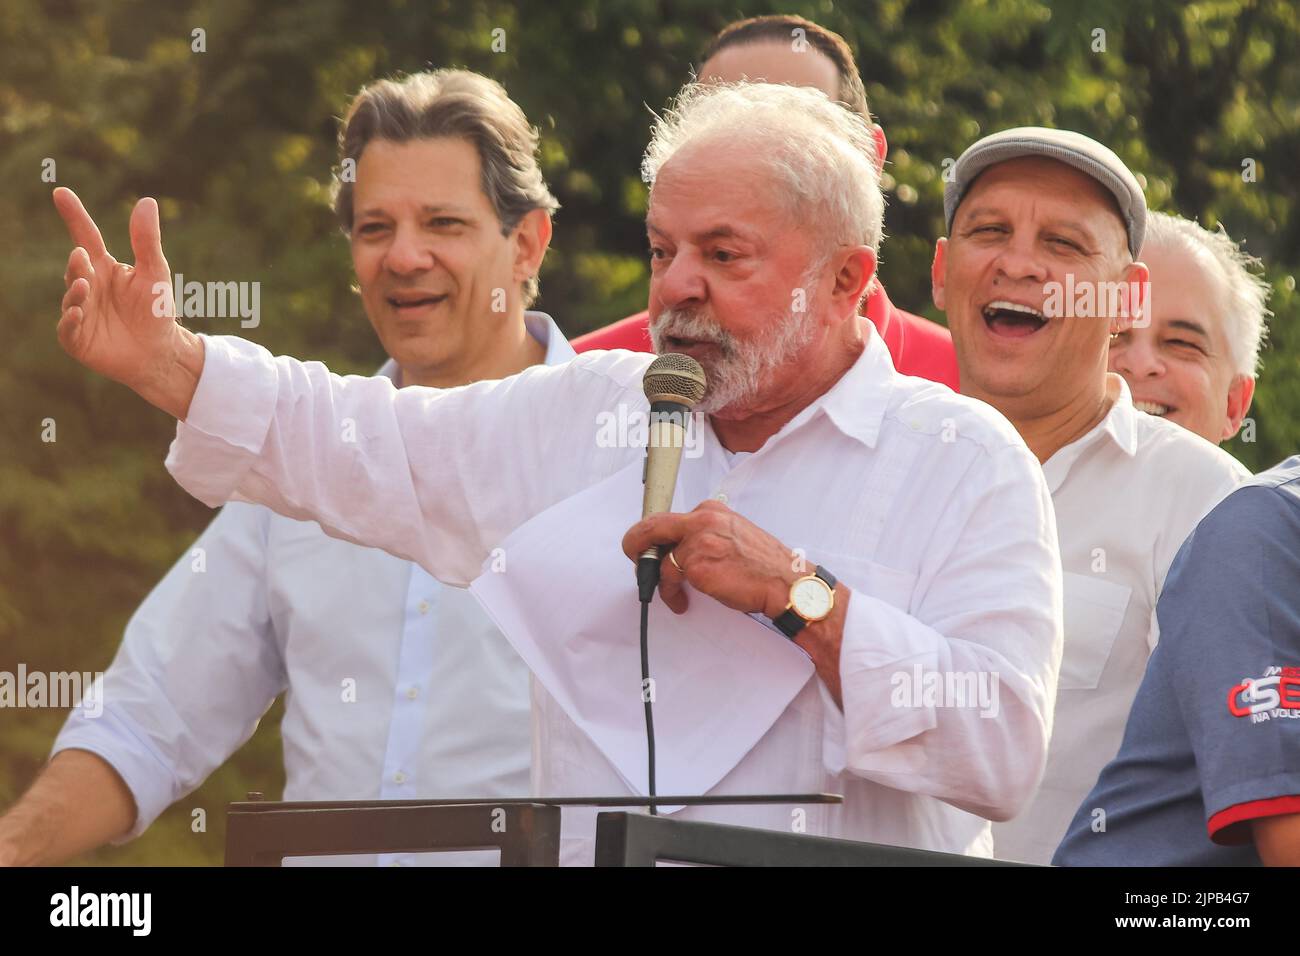 SÃO BERNARDO DO CAMPO, SP - 16.08.2022: LULA VISITA FÁBRICA DA VOLKSWAGEN - Presidential candidate Lula (PT) began his campaign activities this Tuesday afternoon (16) with a visit to the Volkswagen factory in São Bernardo do Campo, accompanied by the candidate for the government of the state of São Paulo, Fernando Haddad (PT) and Márcio França (PSB), candidate for the Senate from São Paulo. (Photo: Yuri Murakami/Fotoarena) Stock Photo